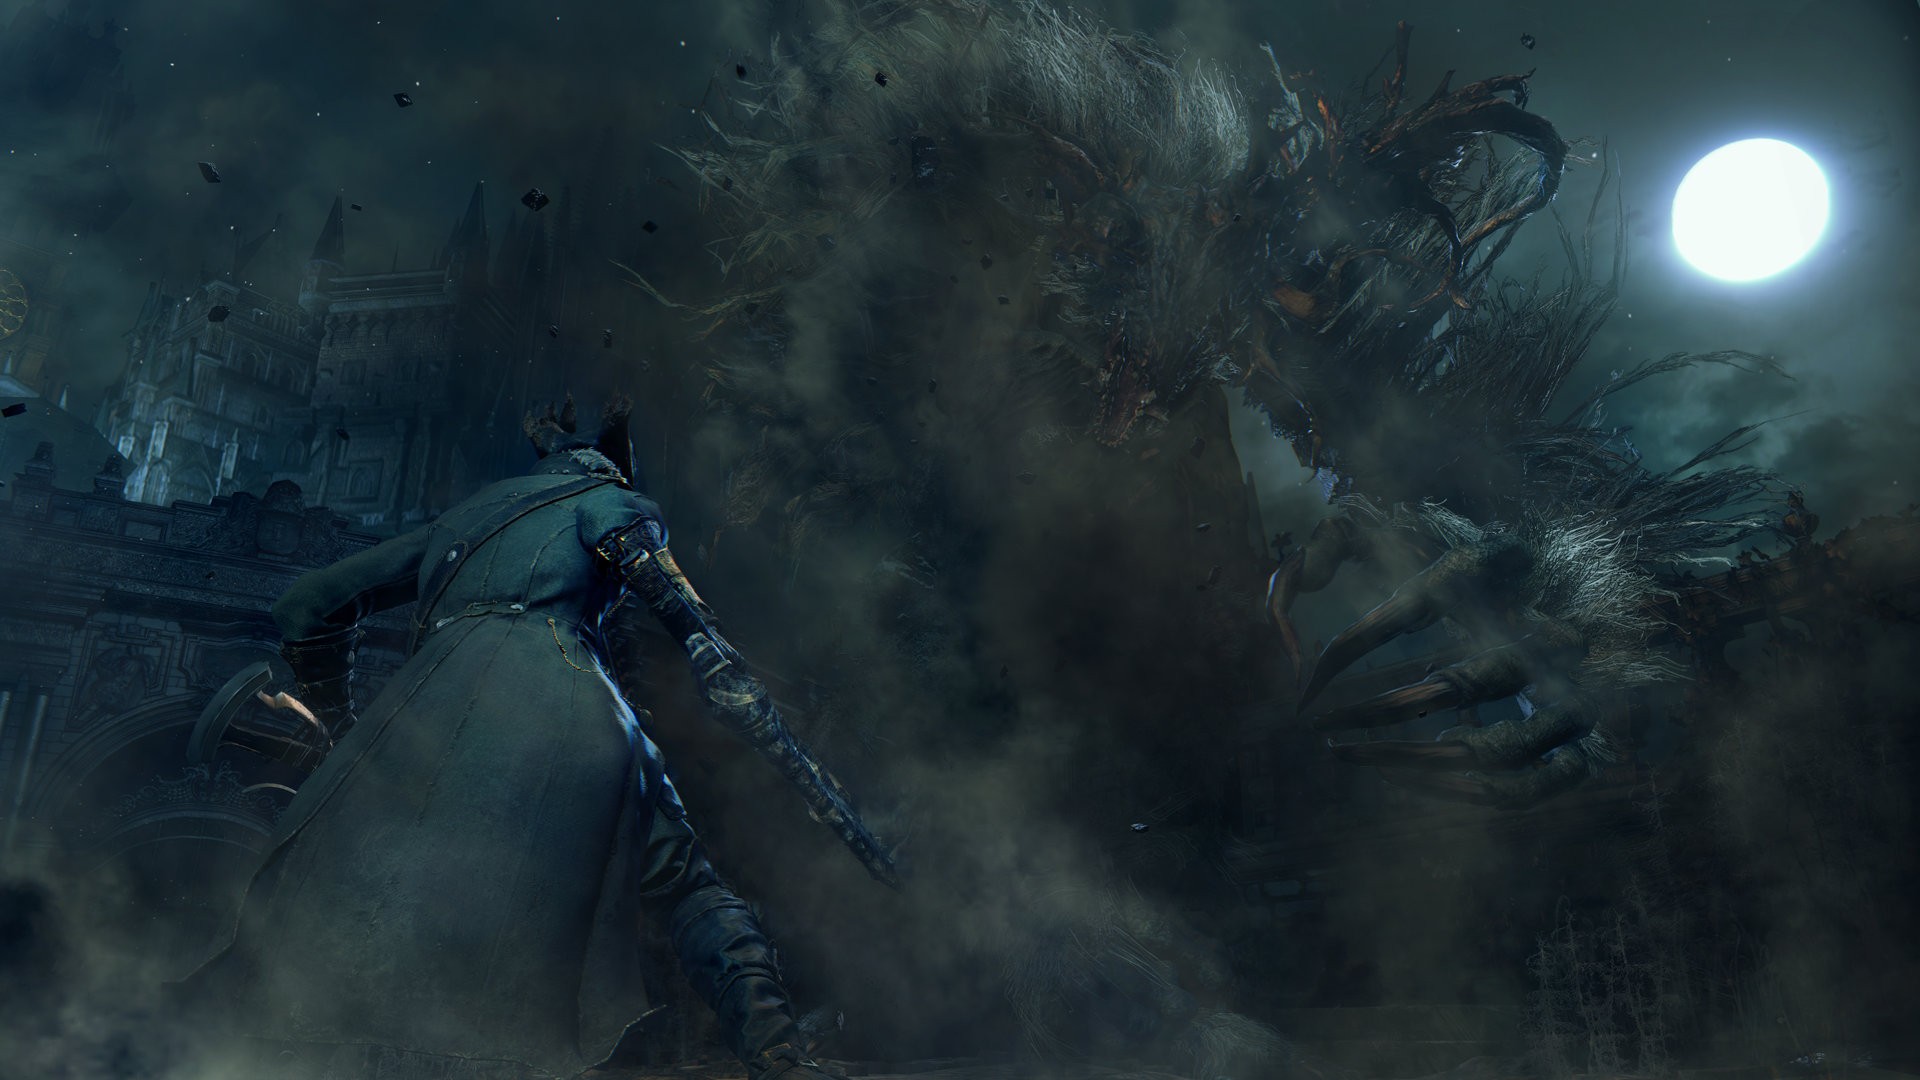 bloodborne-monsterplosion-bloodborne-5-reasons-why-this-could-be-game-of-the-year